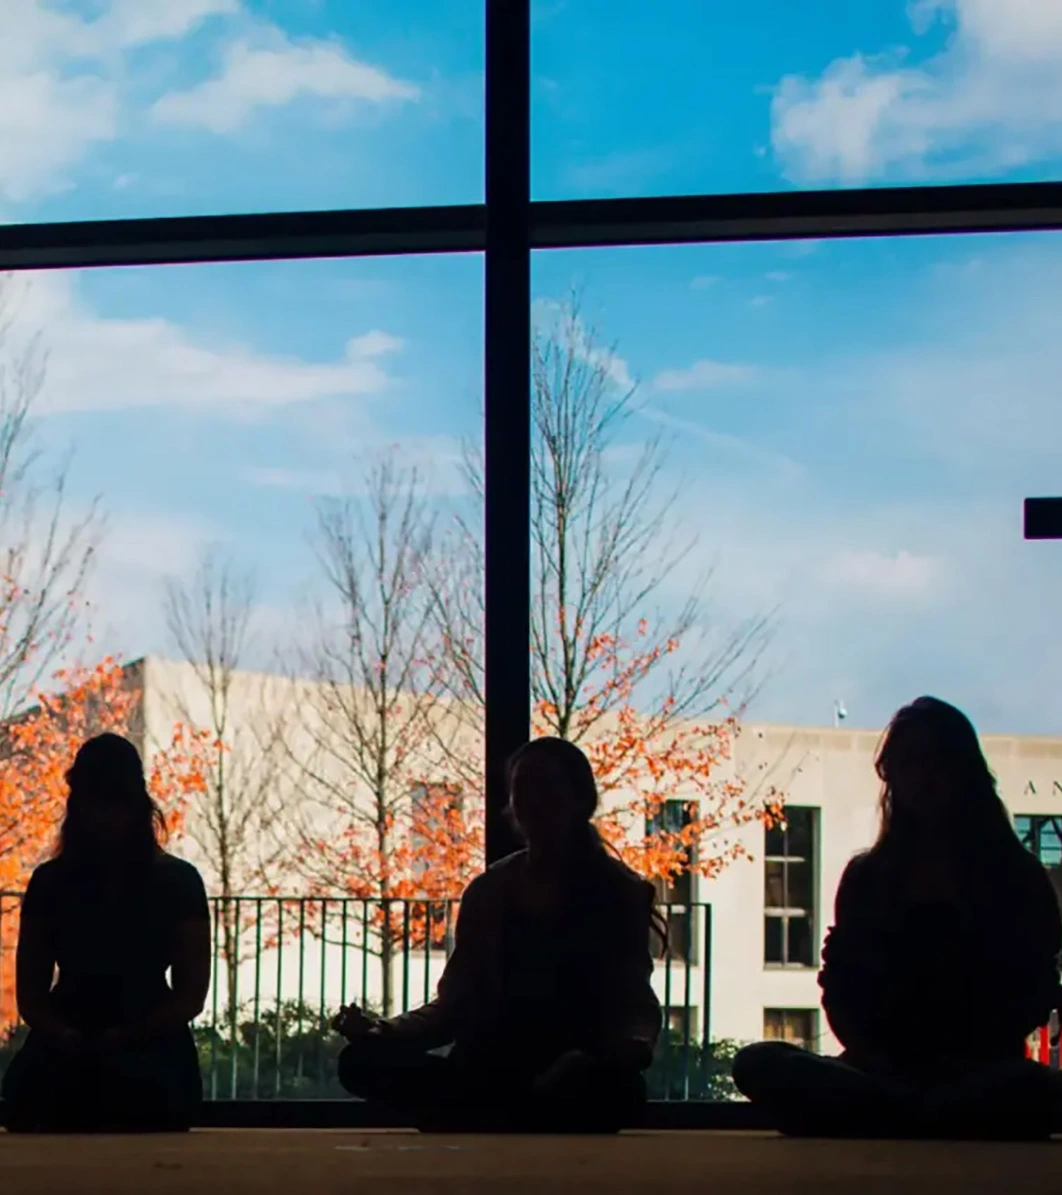 The silhouettes of three students in front of the Landman Library on campus.